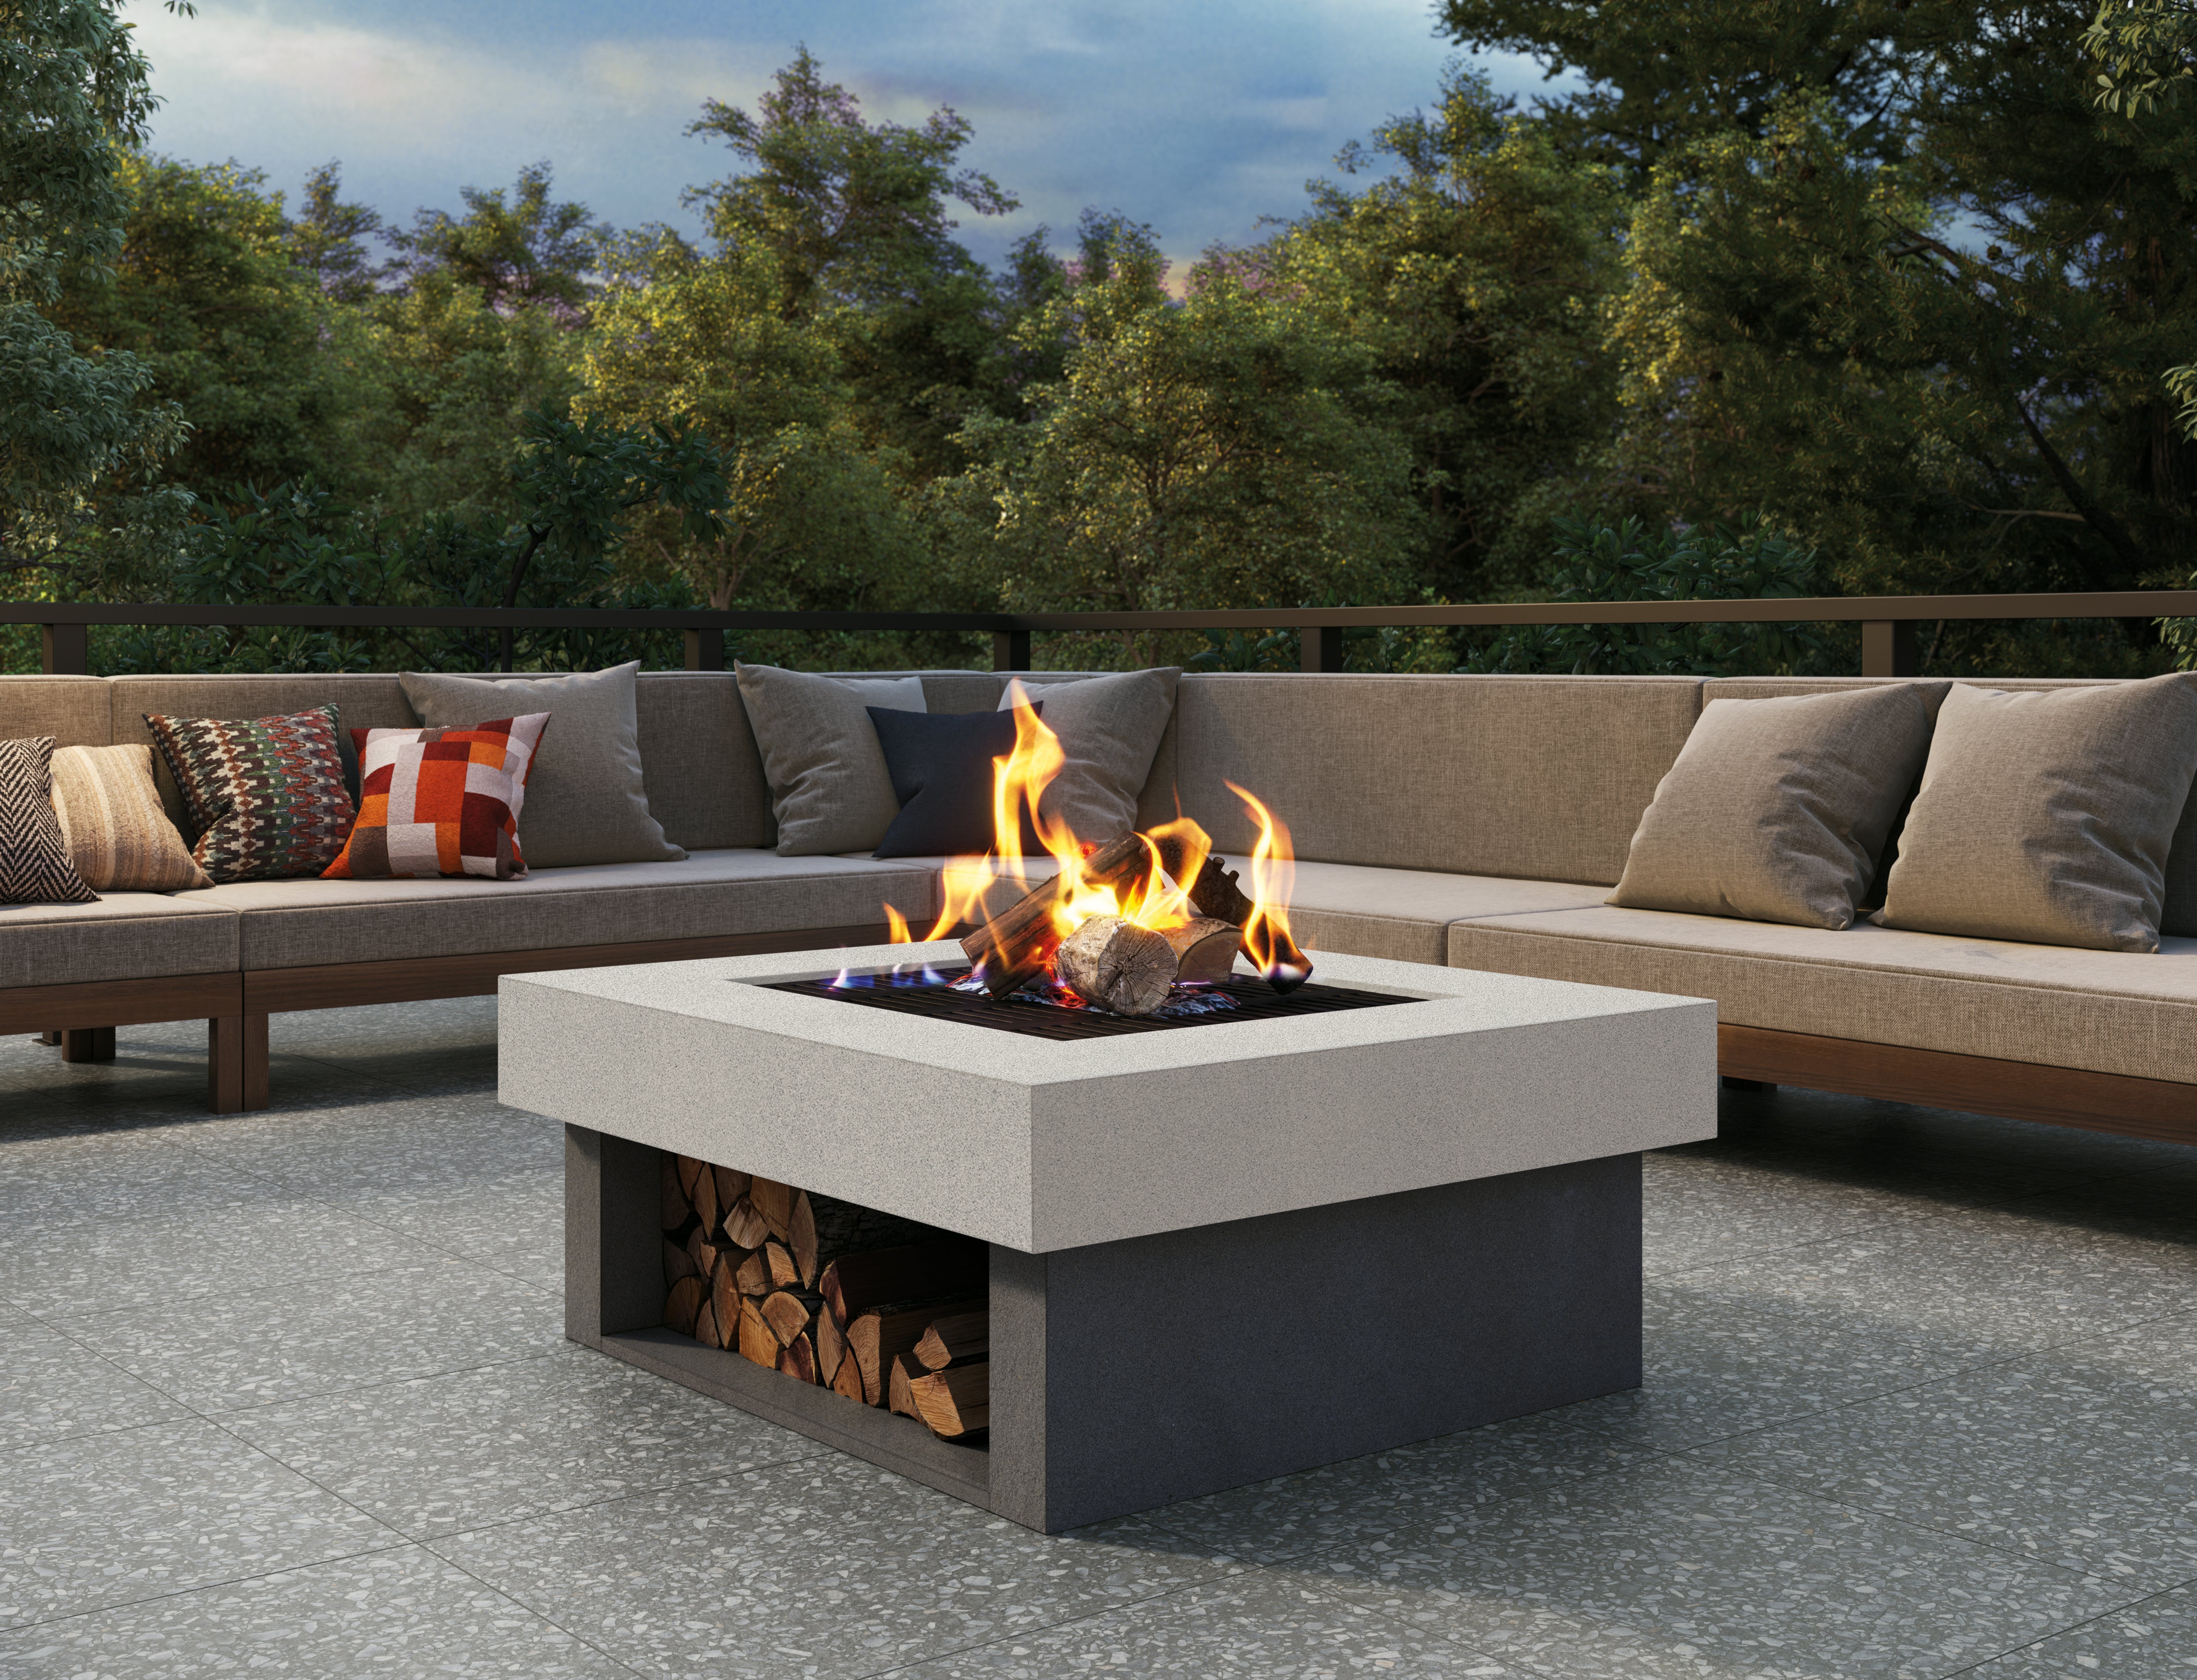 Terrazzo porcelain tile collection by Surface Group featuring modern outdoor patio with fire pit and forest background